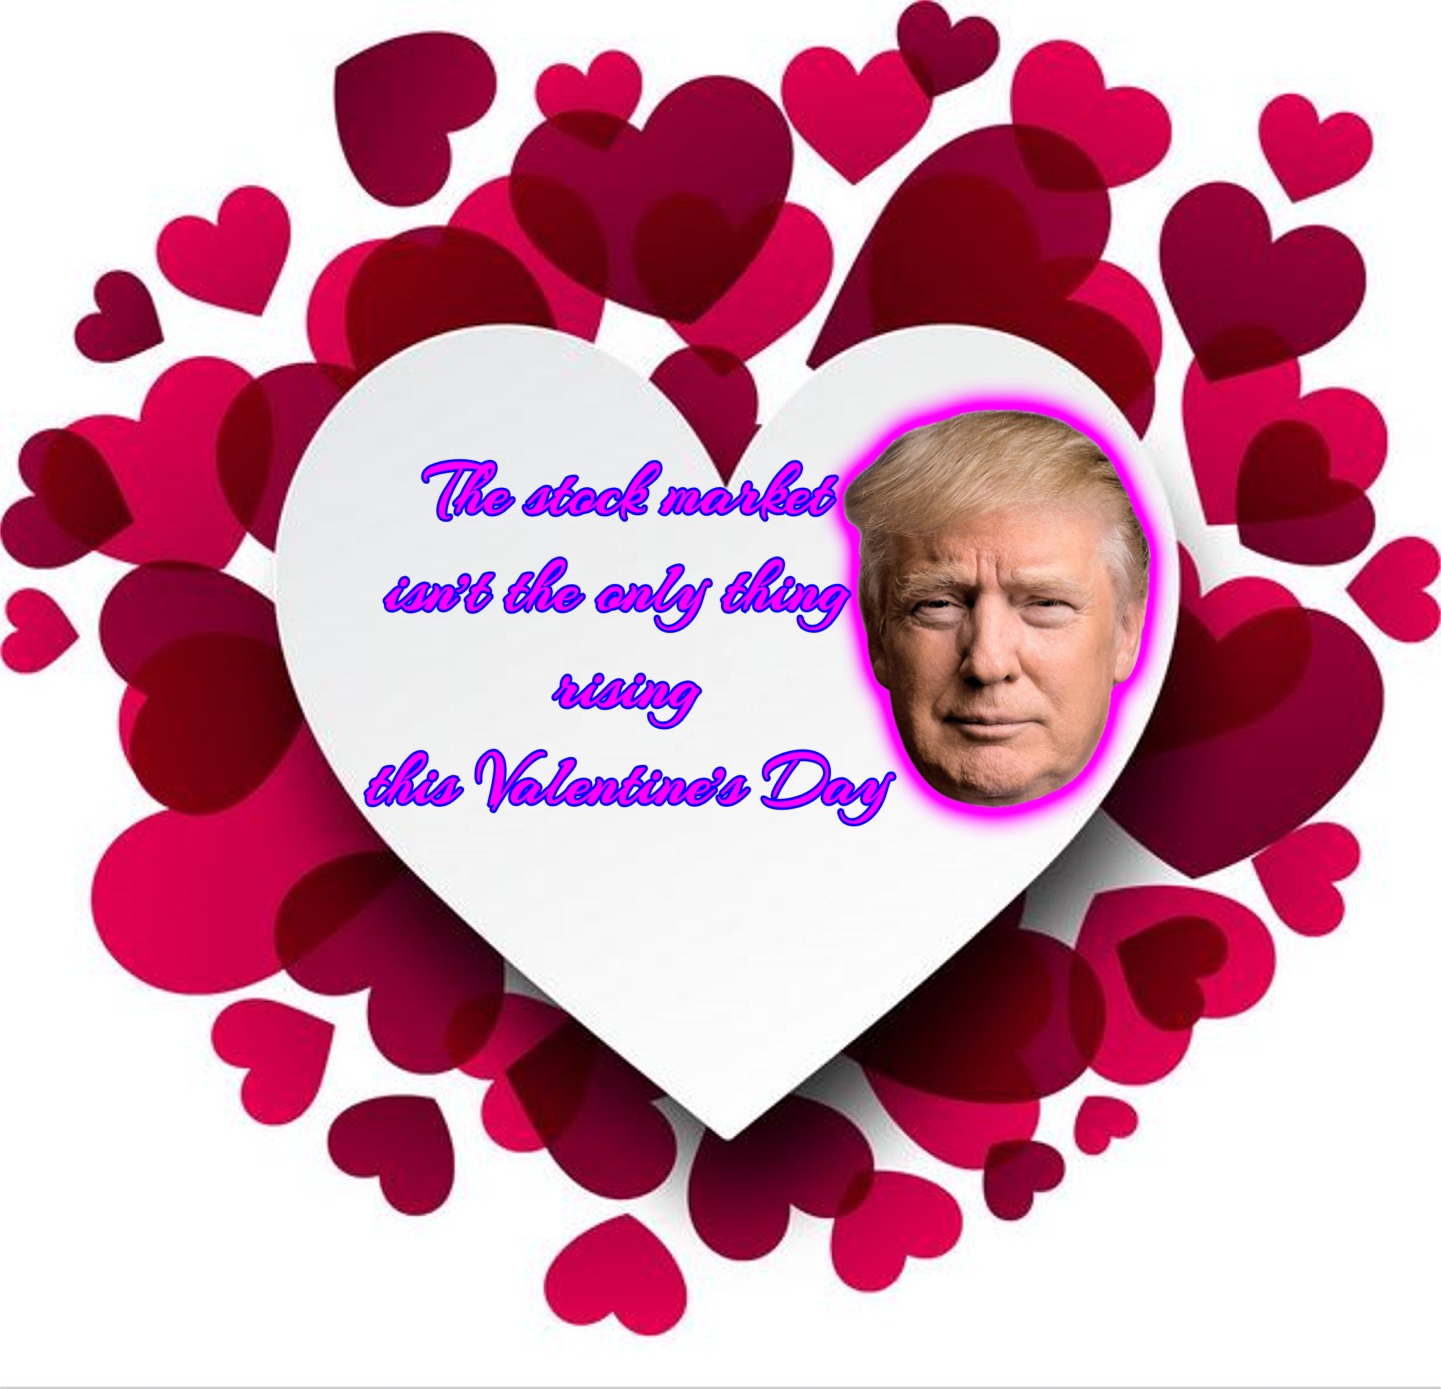 memes - Valentine's Day - The stock market lawl the only thing helling this Valentinde Dag